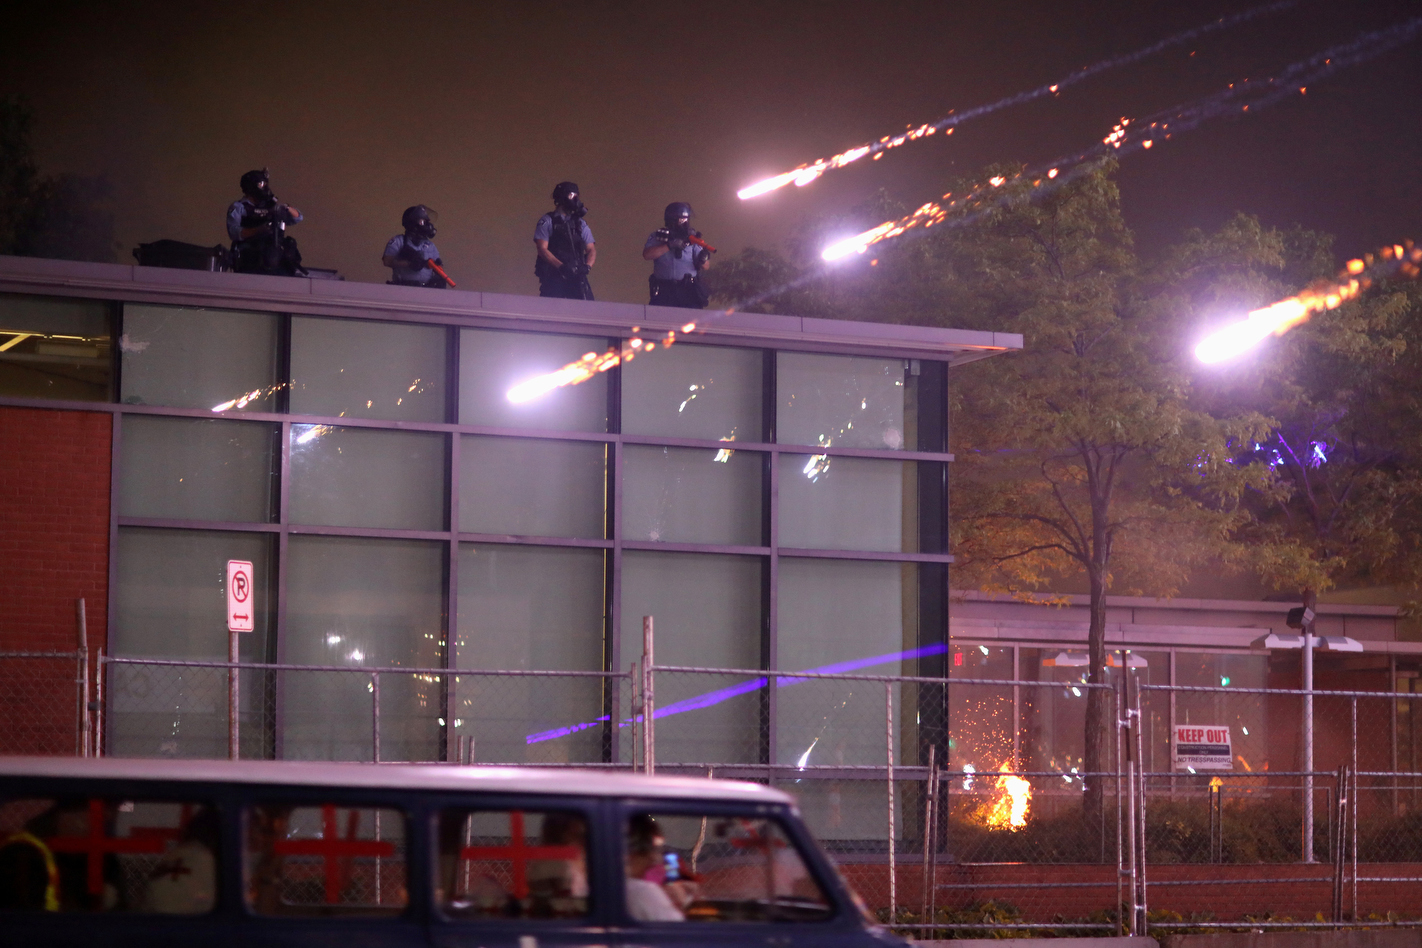 Fireworks rain down near police officers as they hold positions on the roof of their station in Minneapolis, May 29, 2020, after unrest and protests erupted in the aftermath of the death of George Floyd.